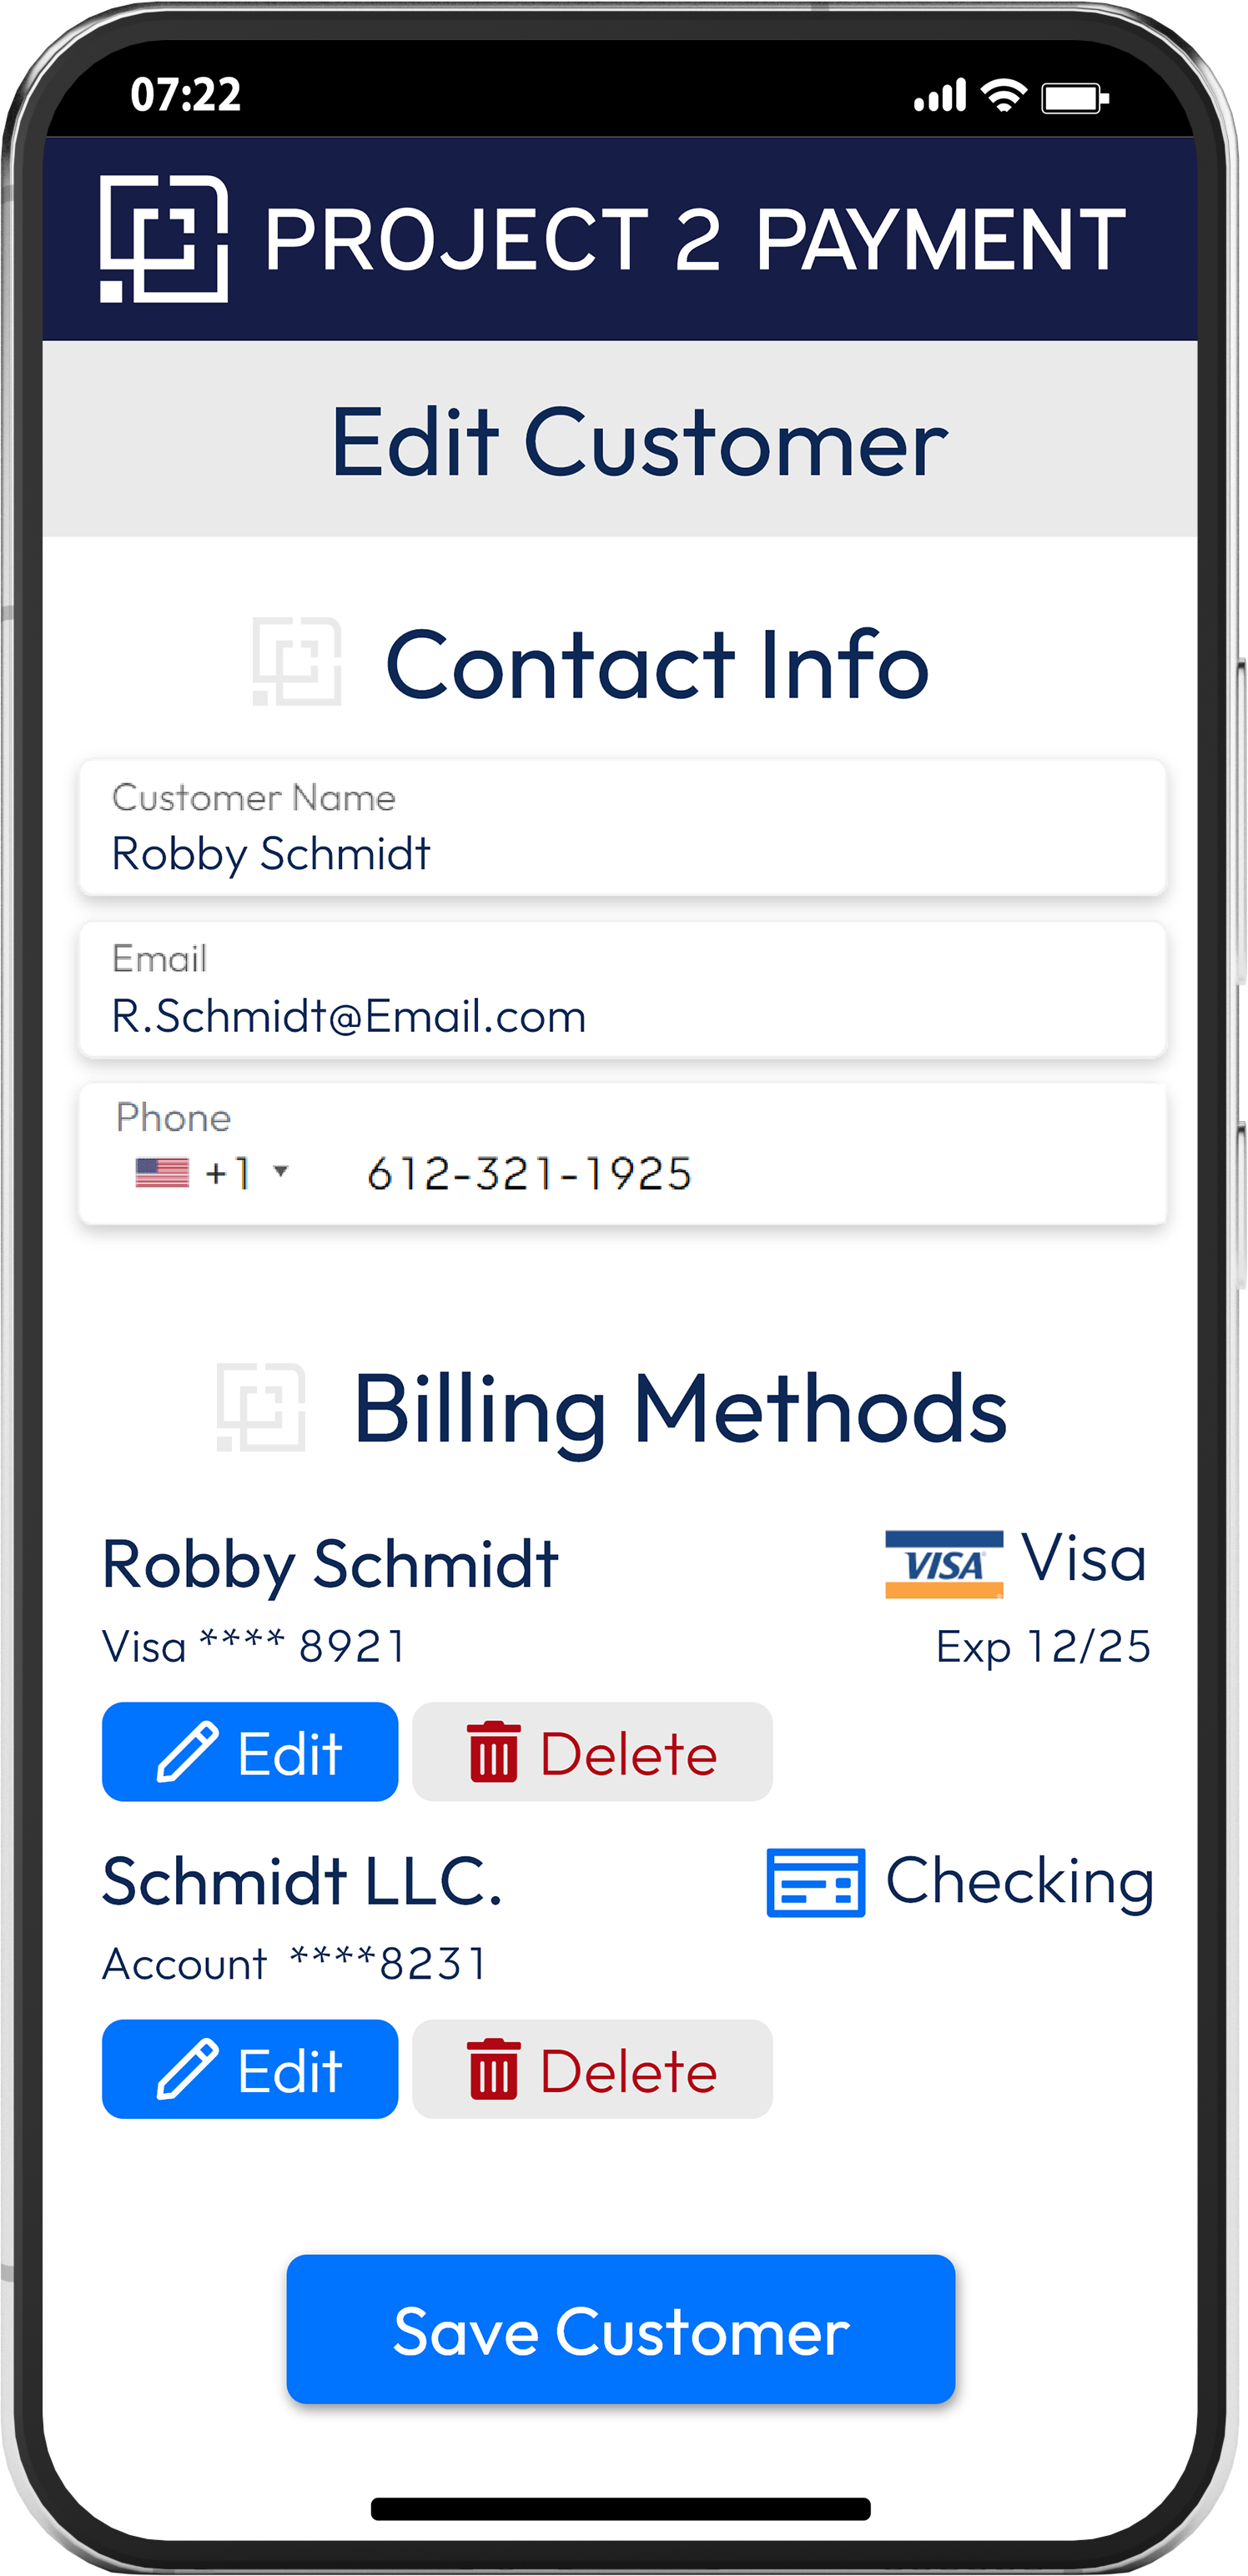 You can create customer profiles that include contact information, multiple addresses, and multiple billing (payment) methods. This allows you to find and easily track customer information, payments, and projects all in a single tool.